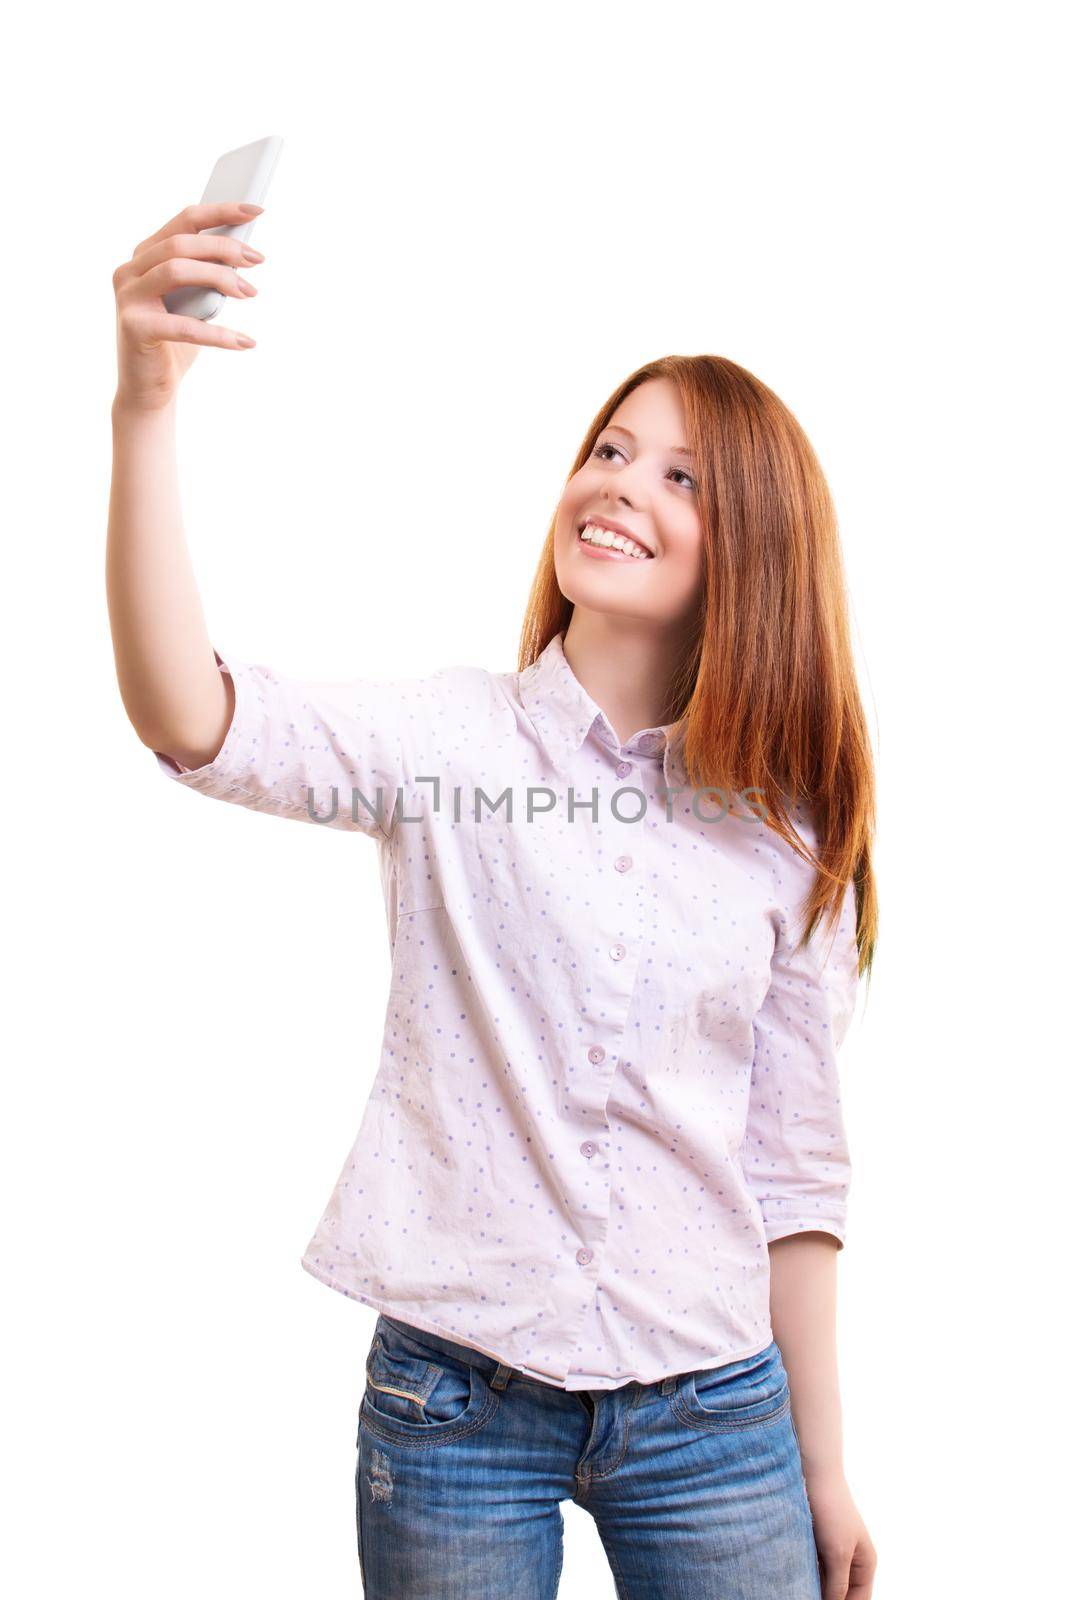 Portrait of a beautiful smiling young woman in smart casual clothes taking a selfie with her mobile phone, isolated on white background. Social media, communication concept.